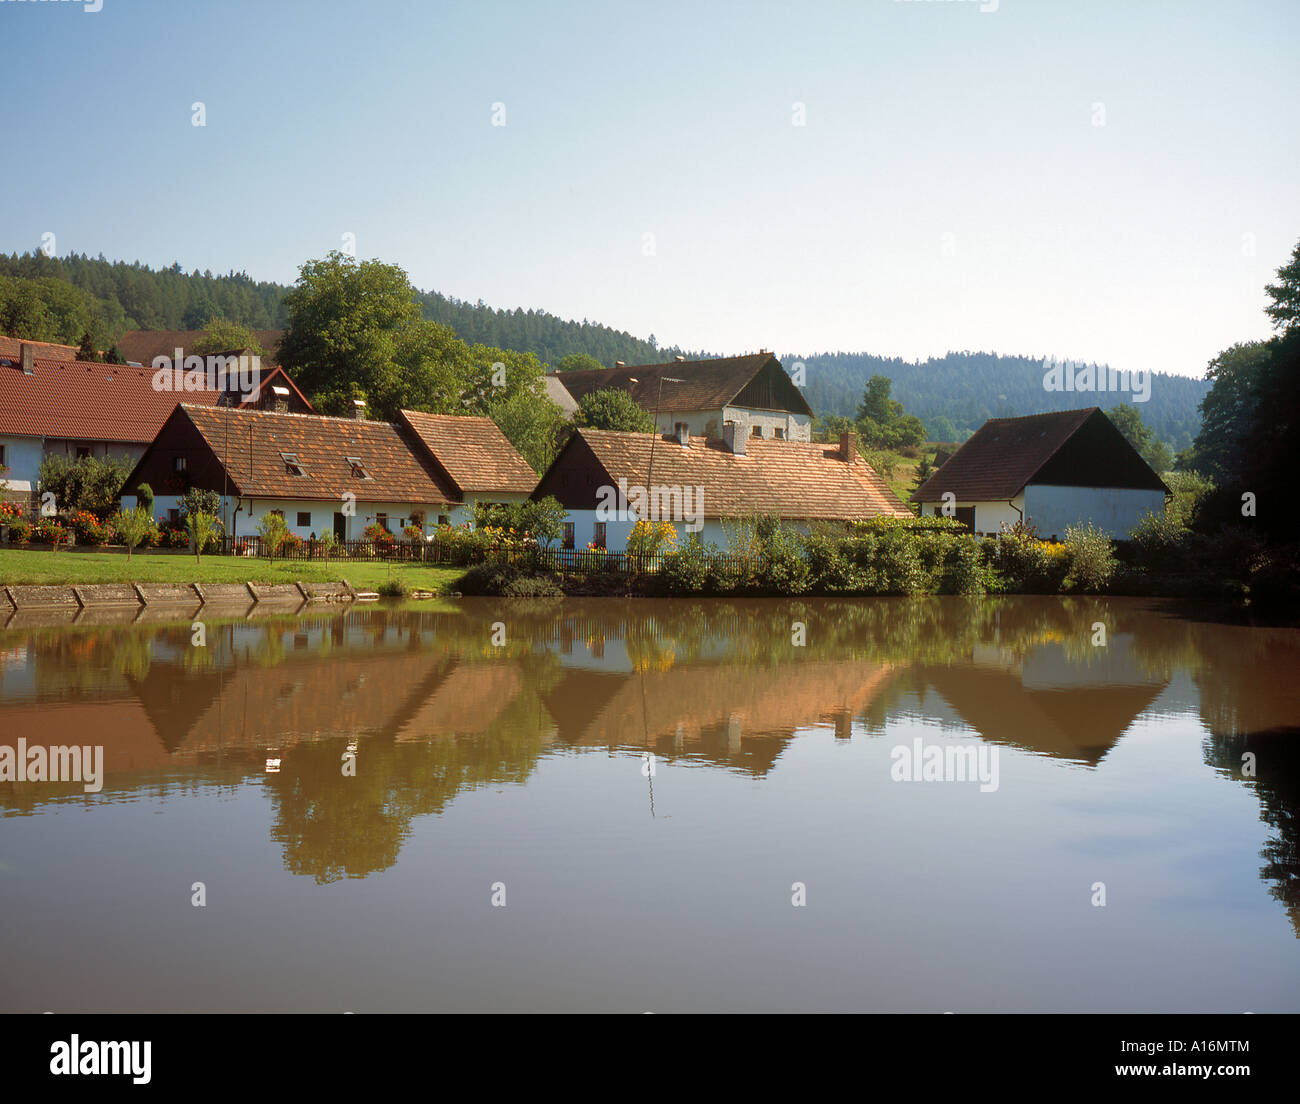 Village of  Pecetin Czech Republic Central Europe. Photo by Willy Matheisl Stock Photo